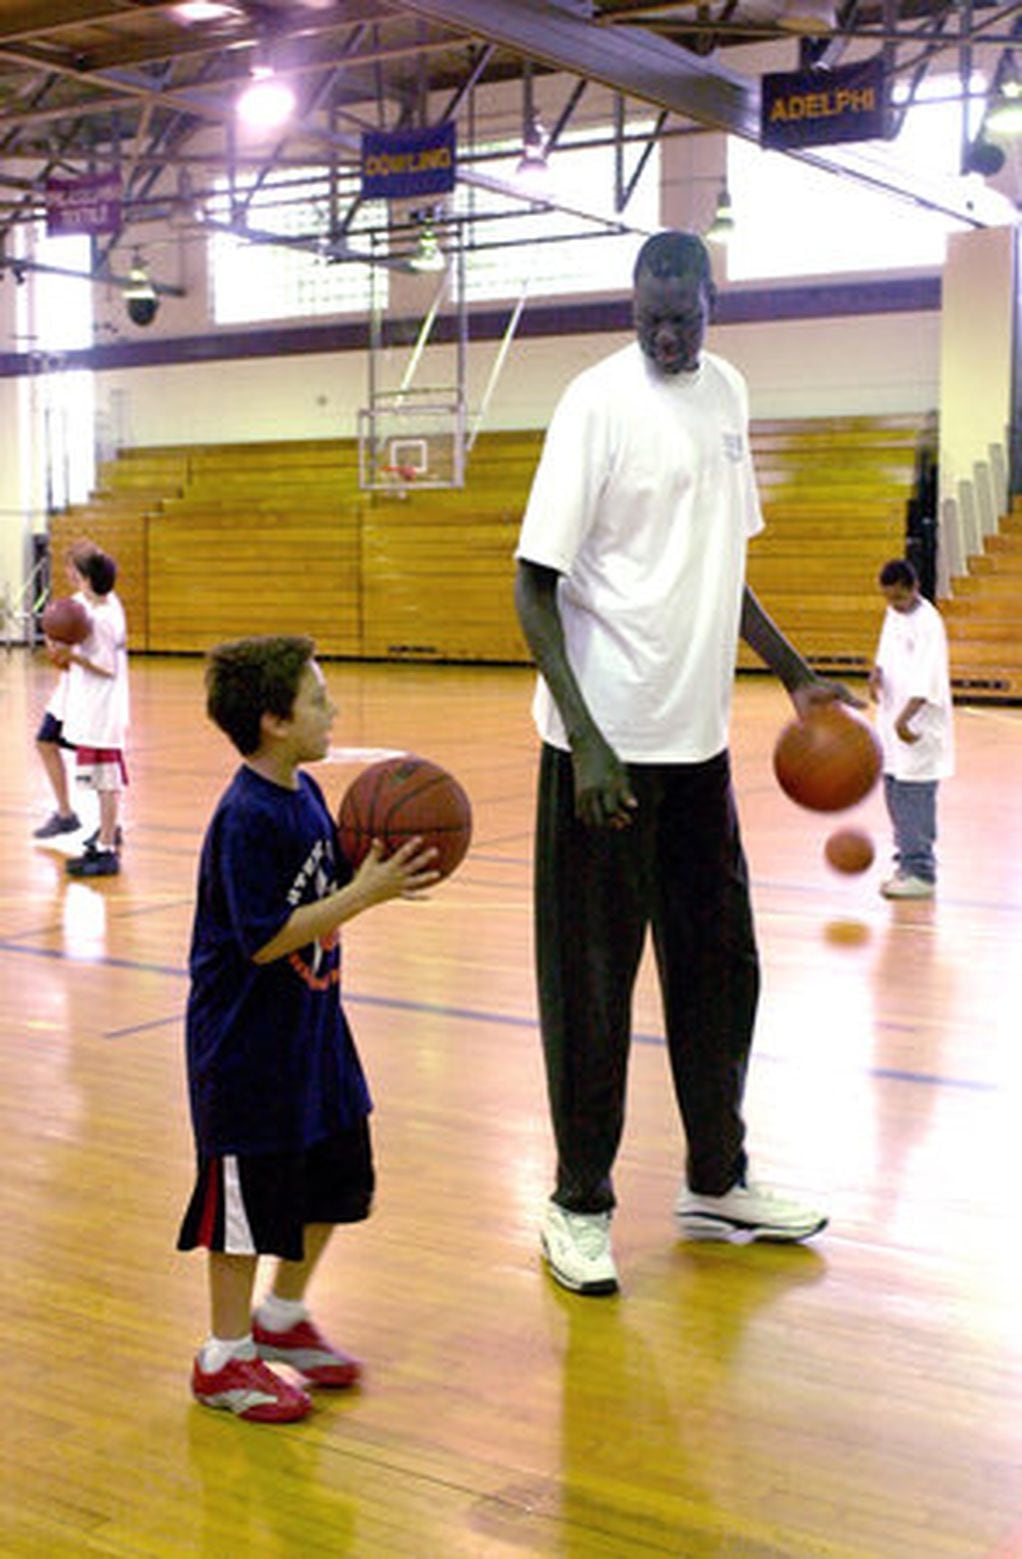 Hoops Daily - Manute Bol is the only player in NBA history